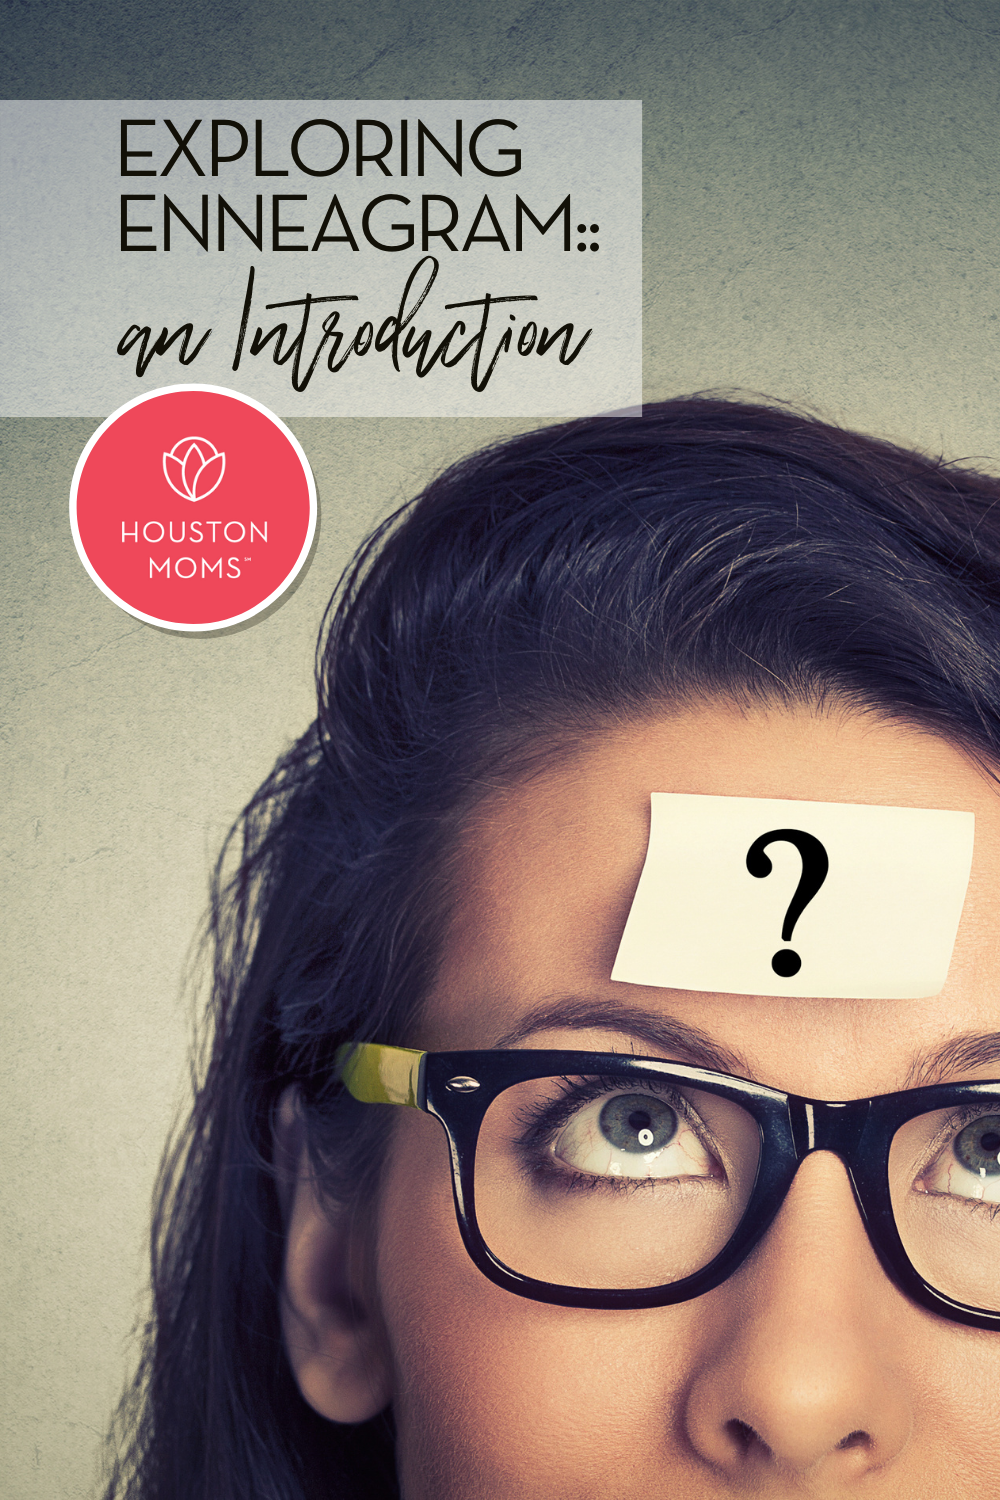 Exploring Enneagram: An Introduction. A photograph of a woman looking up at a question mark stuck to her forehead. Logo: Houston moms. 